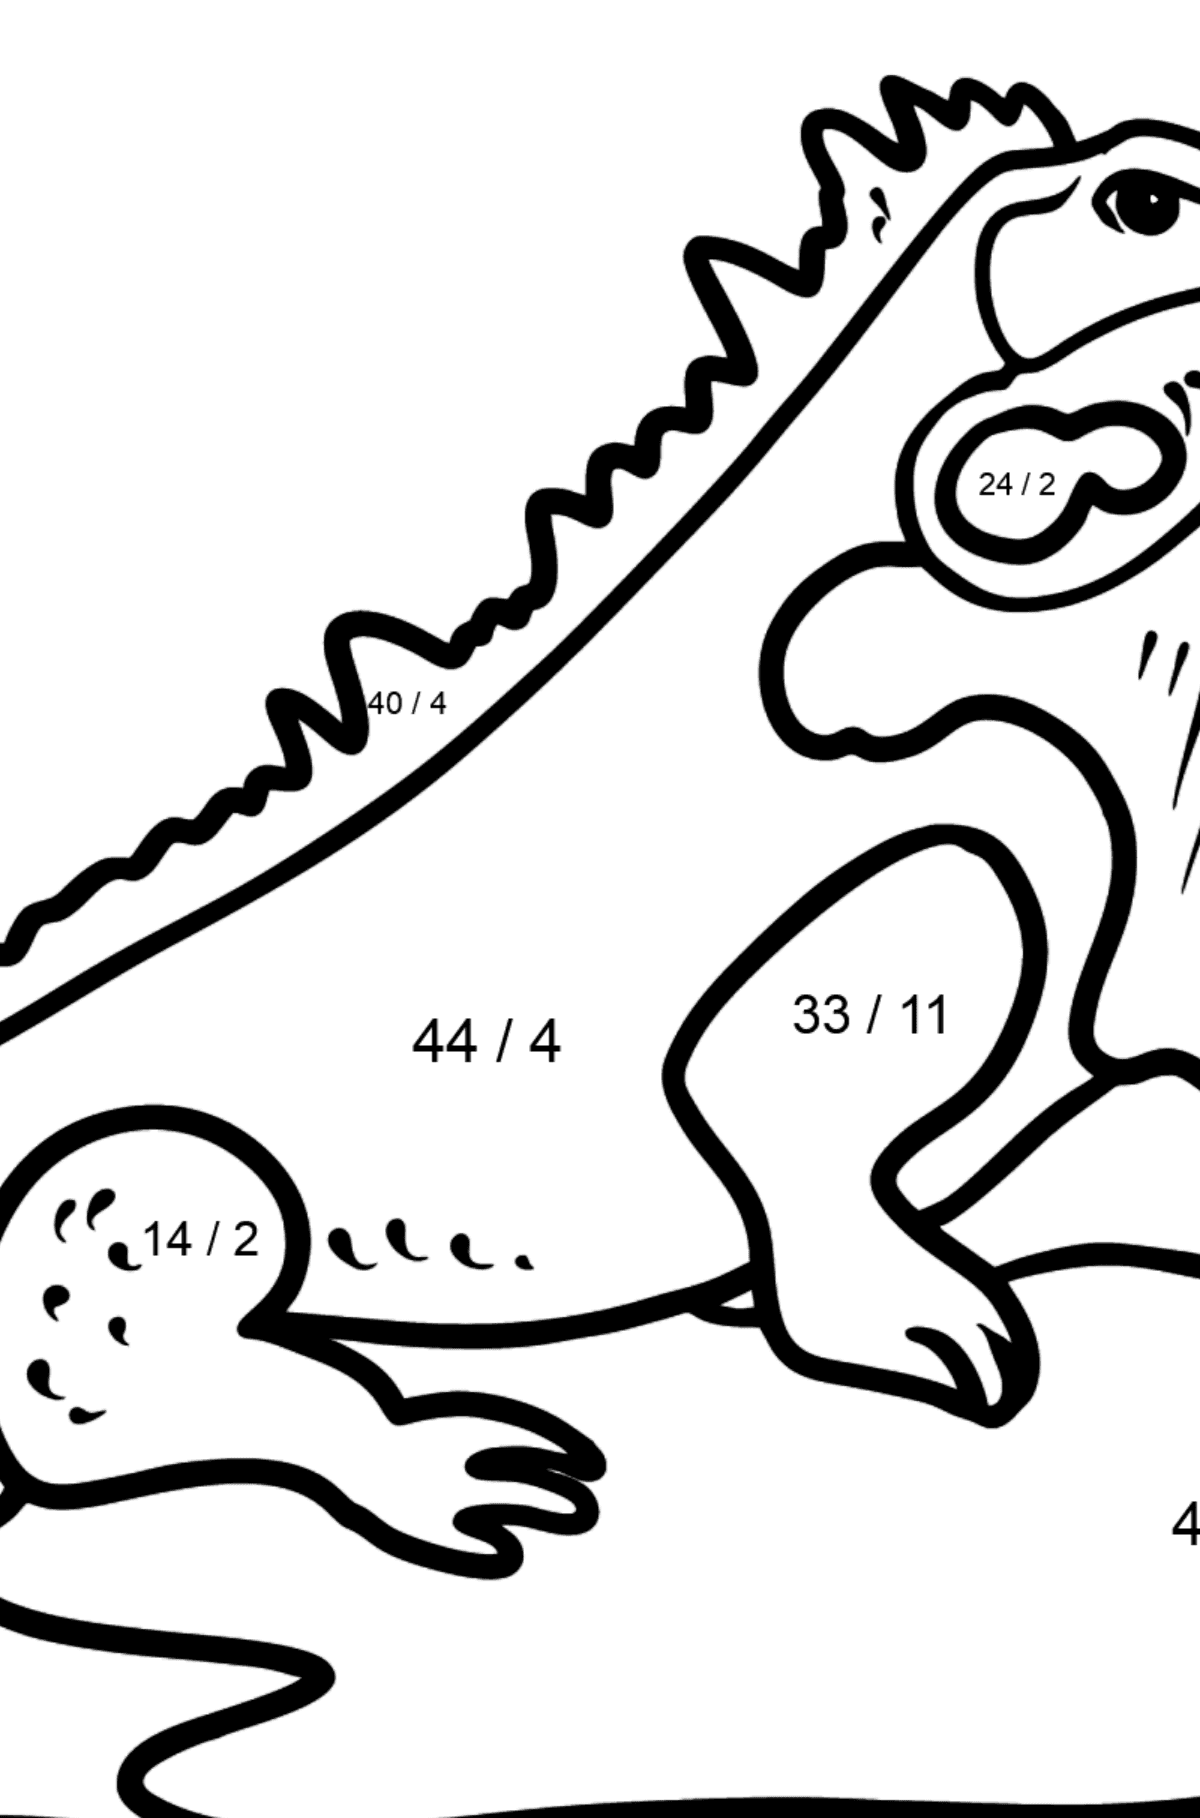 Portuguese Letter I coloring pages - IGUANA - Math Coloring - Division for Kids